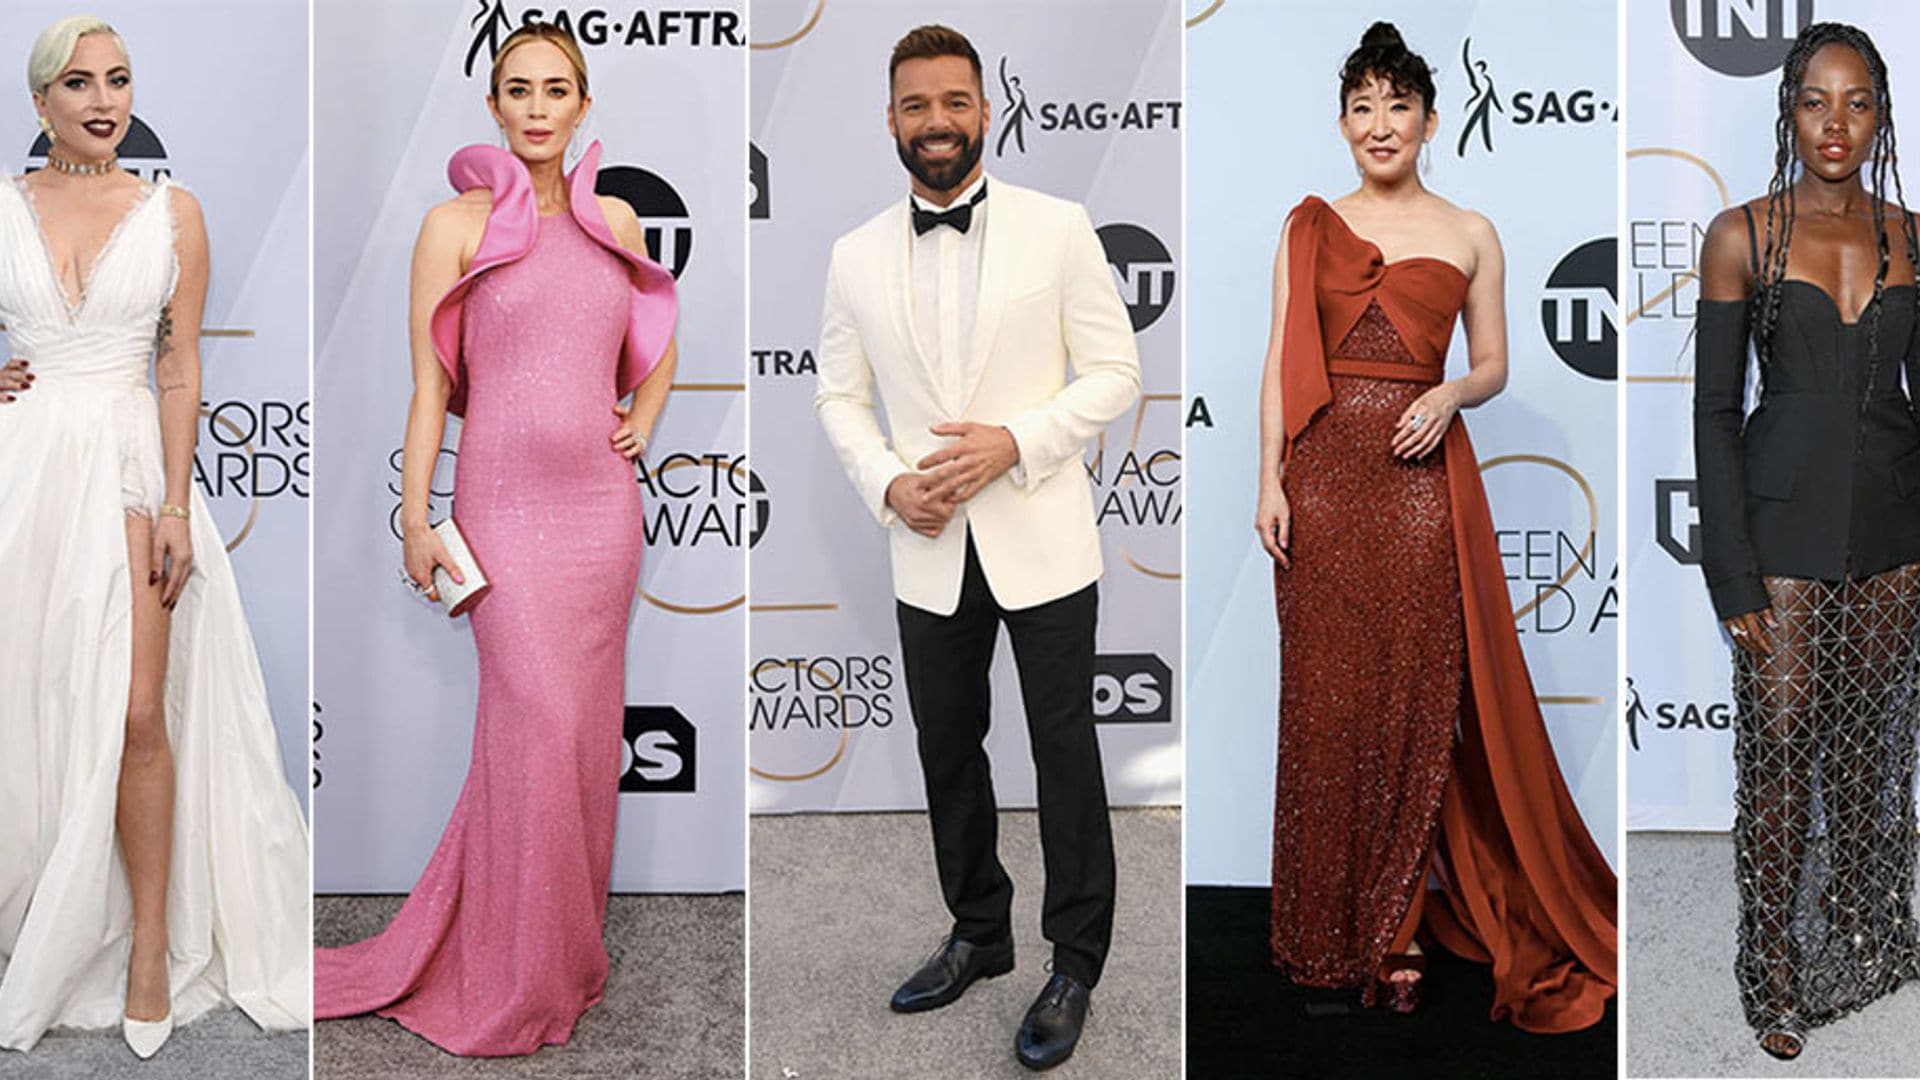 SAG Awards 2019: All the best looks from the red carpet